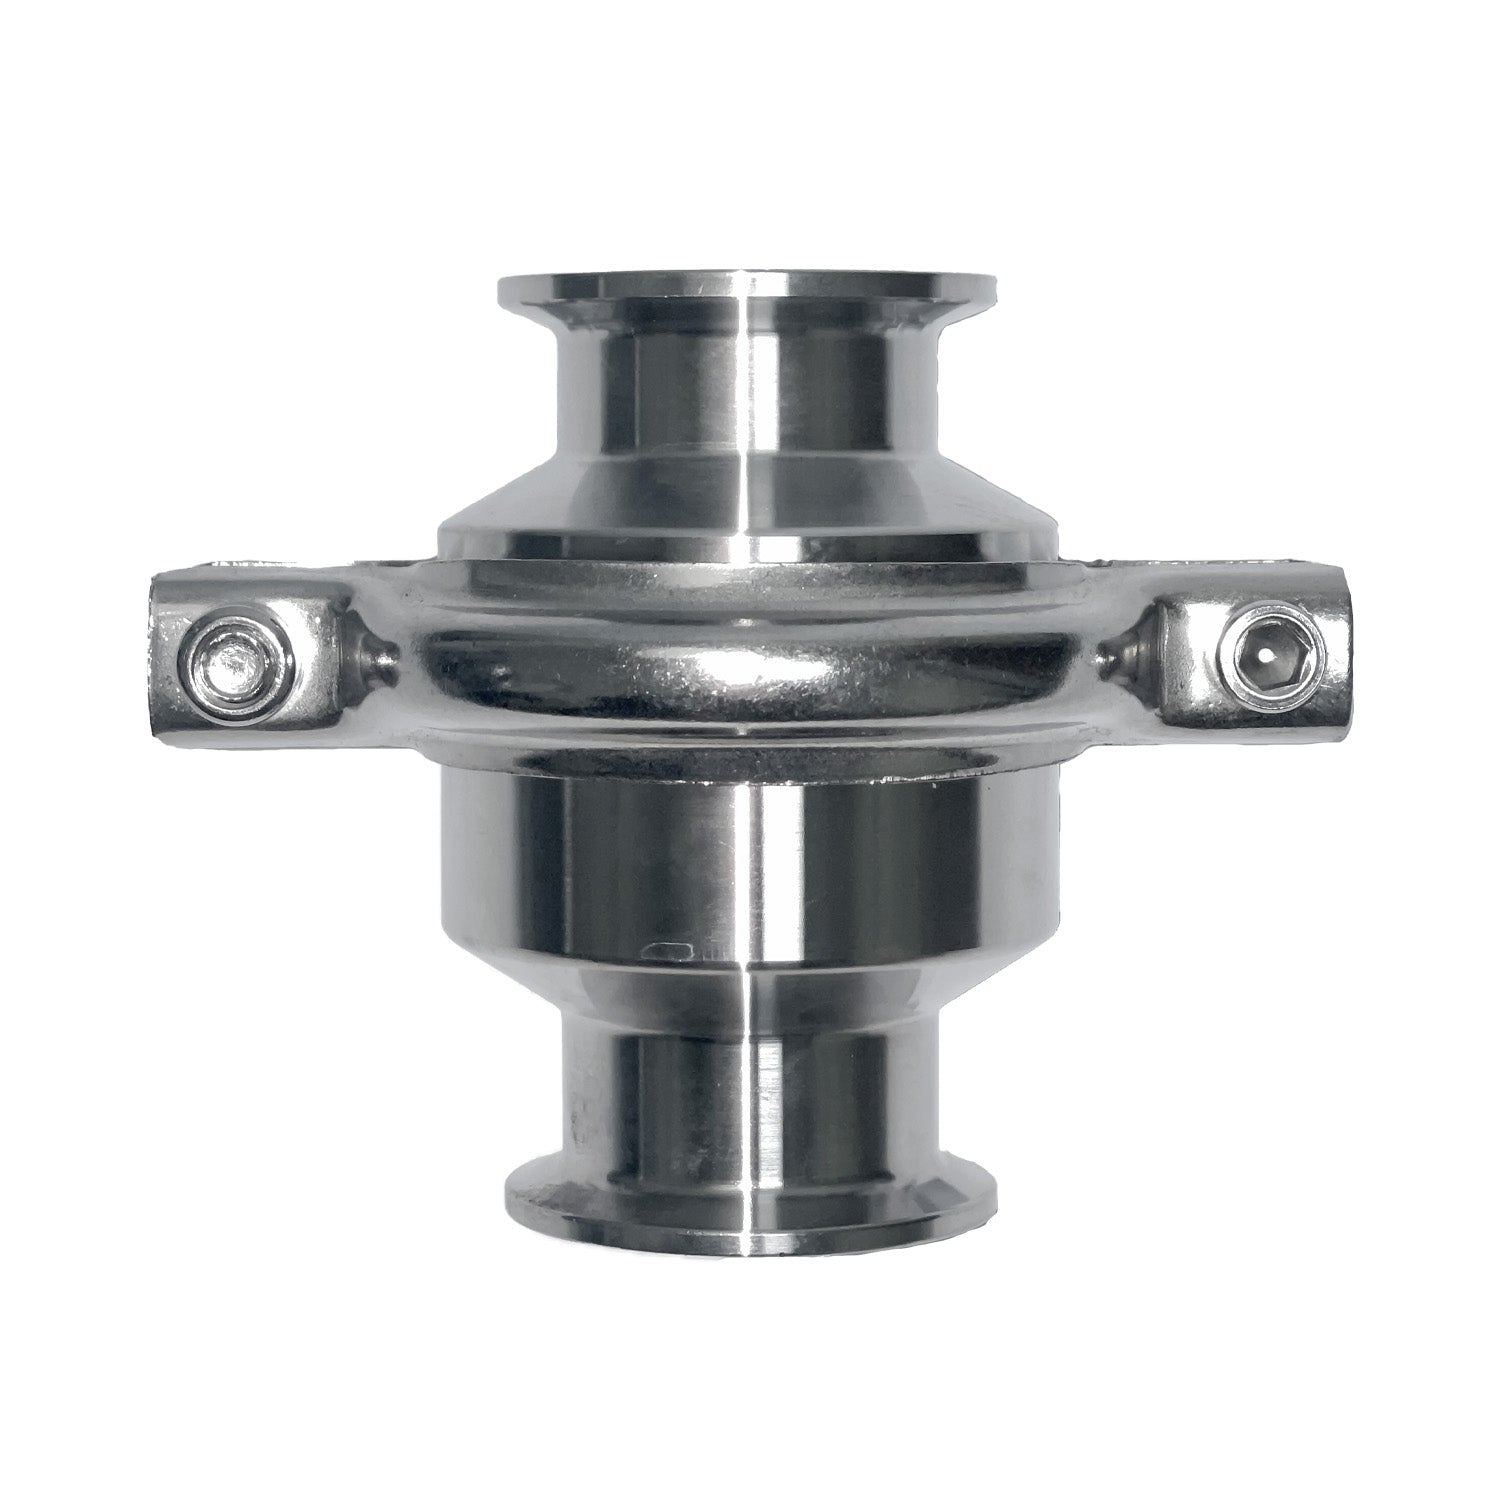 High-quality 1.5" Tri-Clamp check valve image for reliable fluid control. This check valve is designed to meet the demands of various industries, including brewing, food processing, and pharmaceuticals. The 1.5" Tri-Clamp connection ensures a secure and leak-free installation.